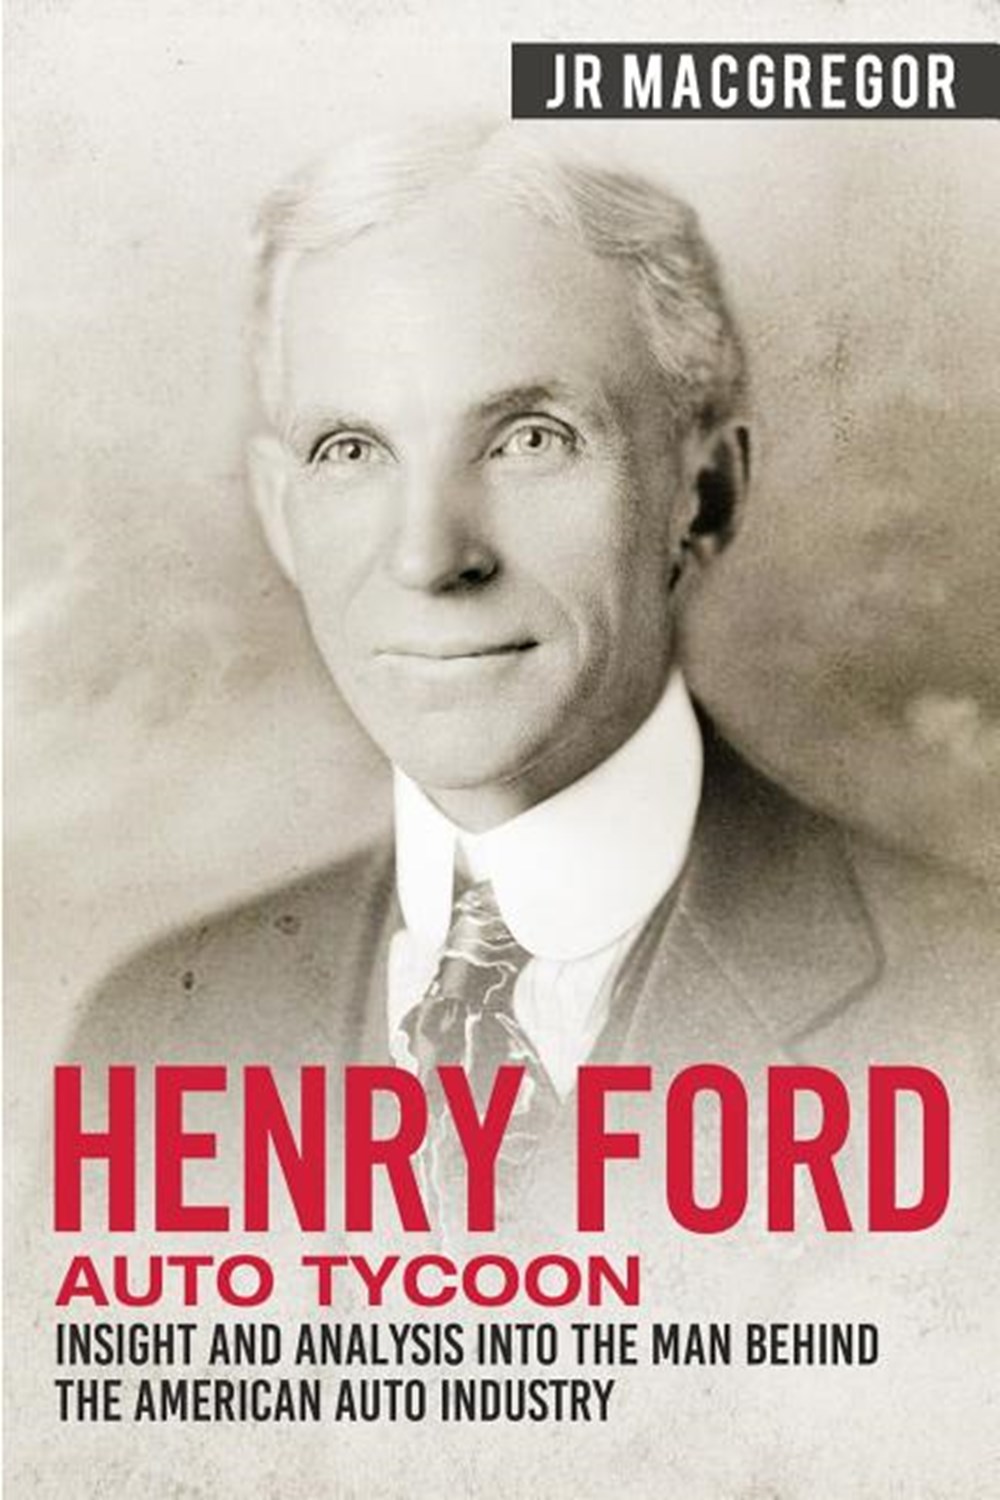 Henry Ford - Auto Tycoon Insight and Analysis into the Man Behind the American Auto Industry